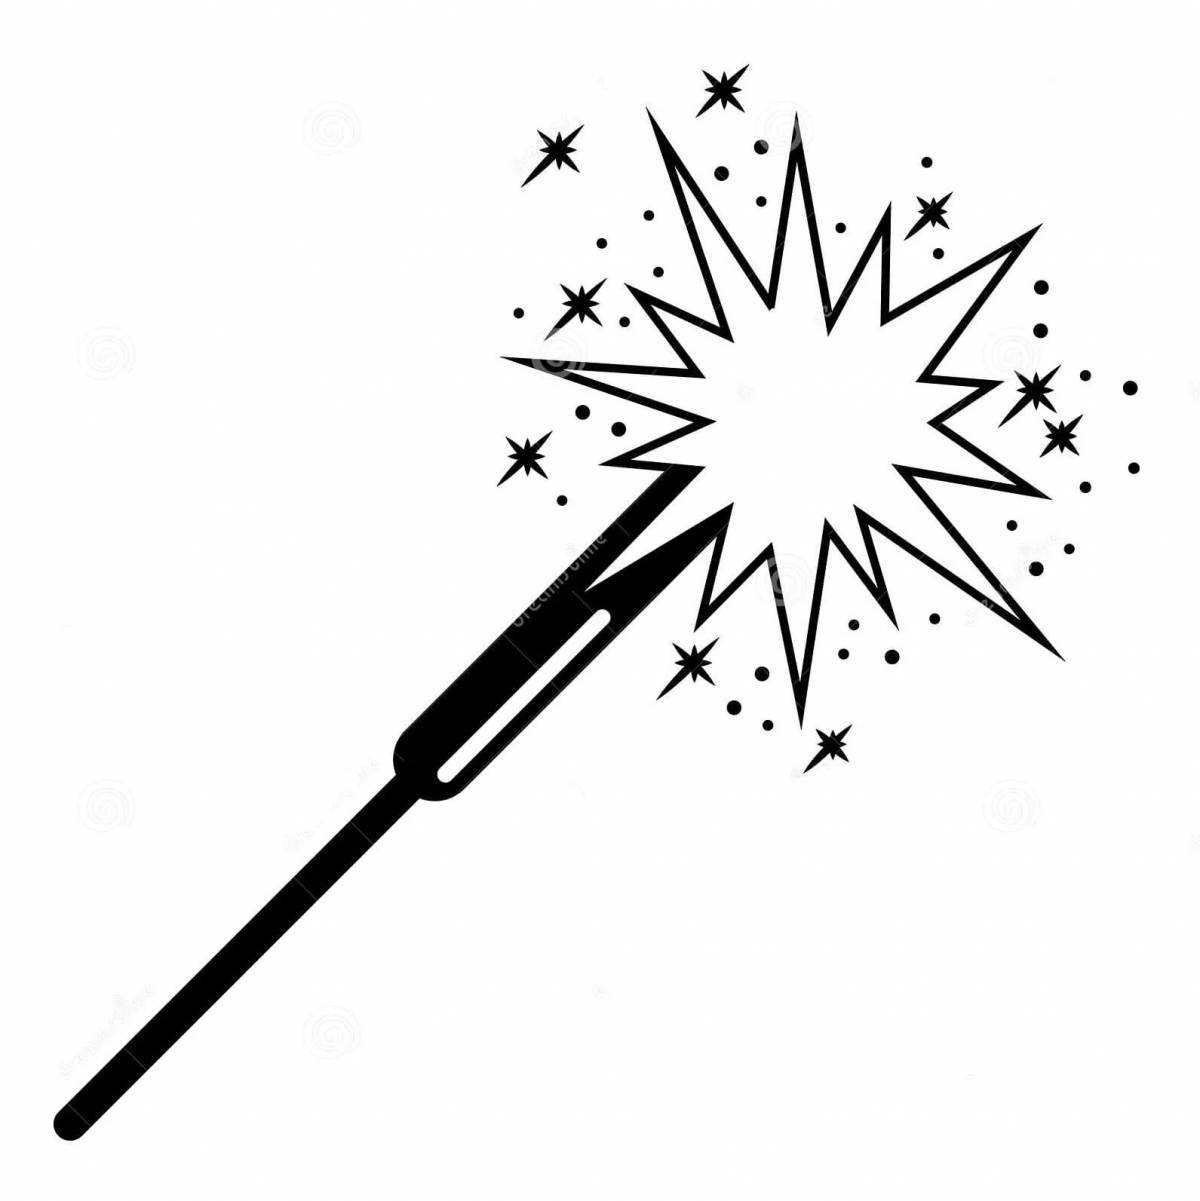 Coloring book grand nose sparklers